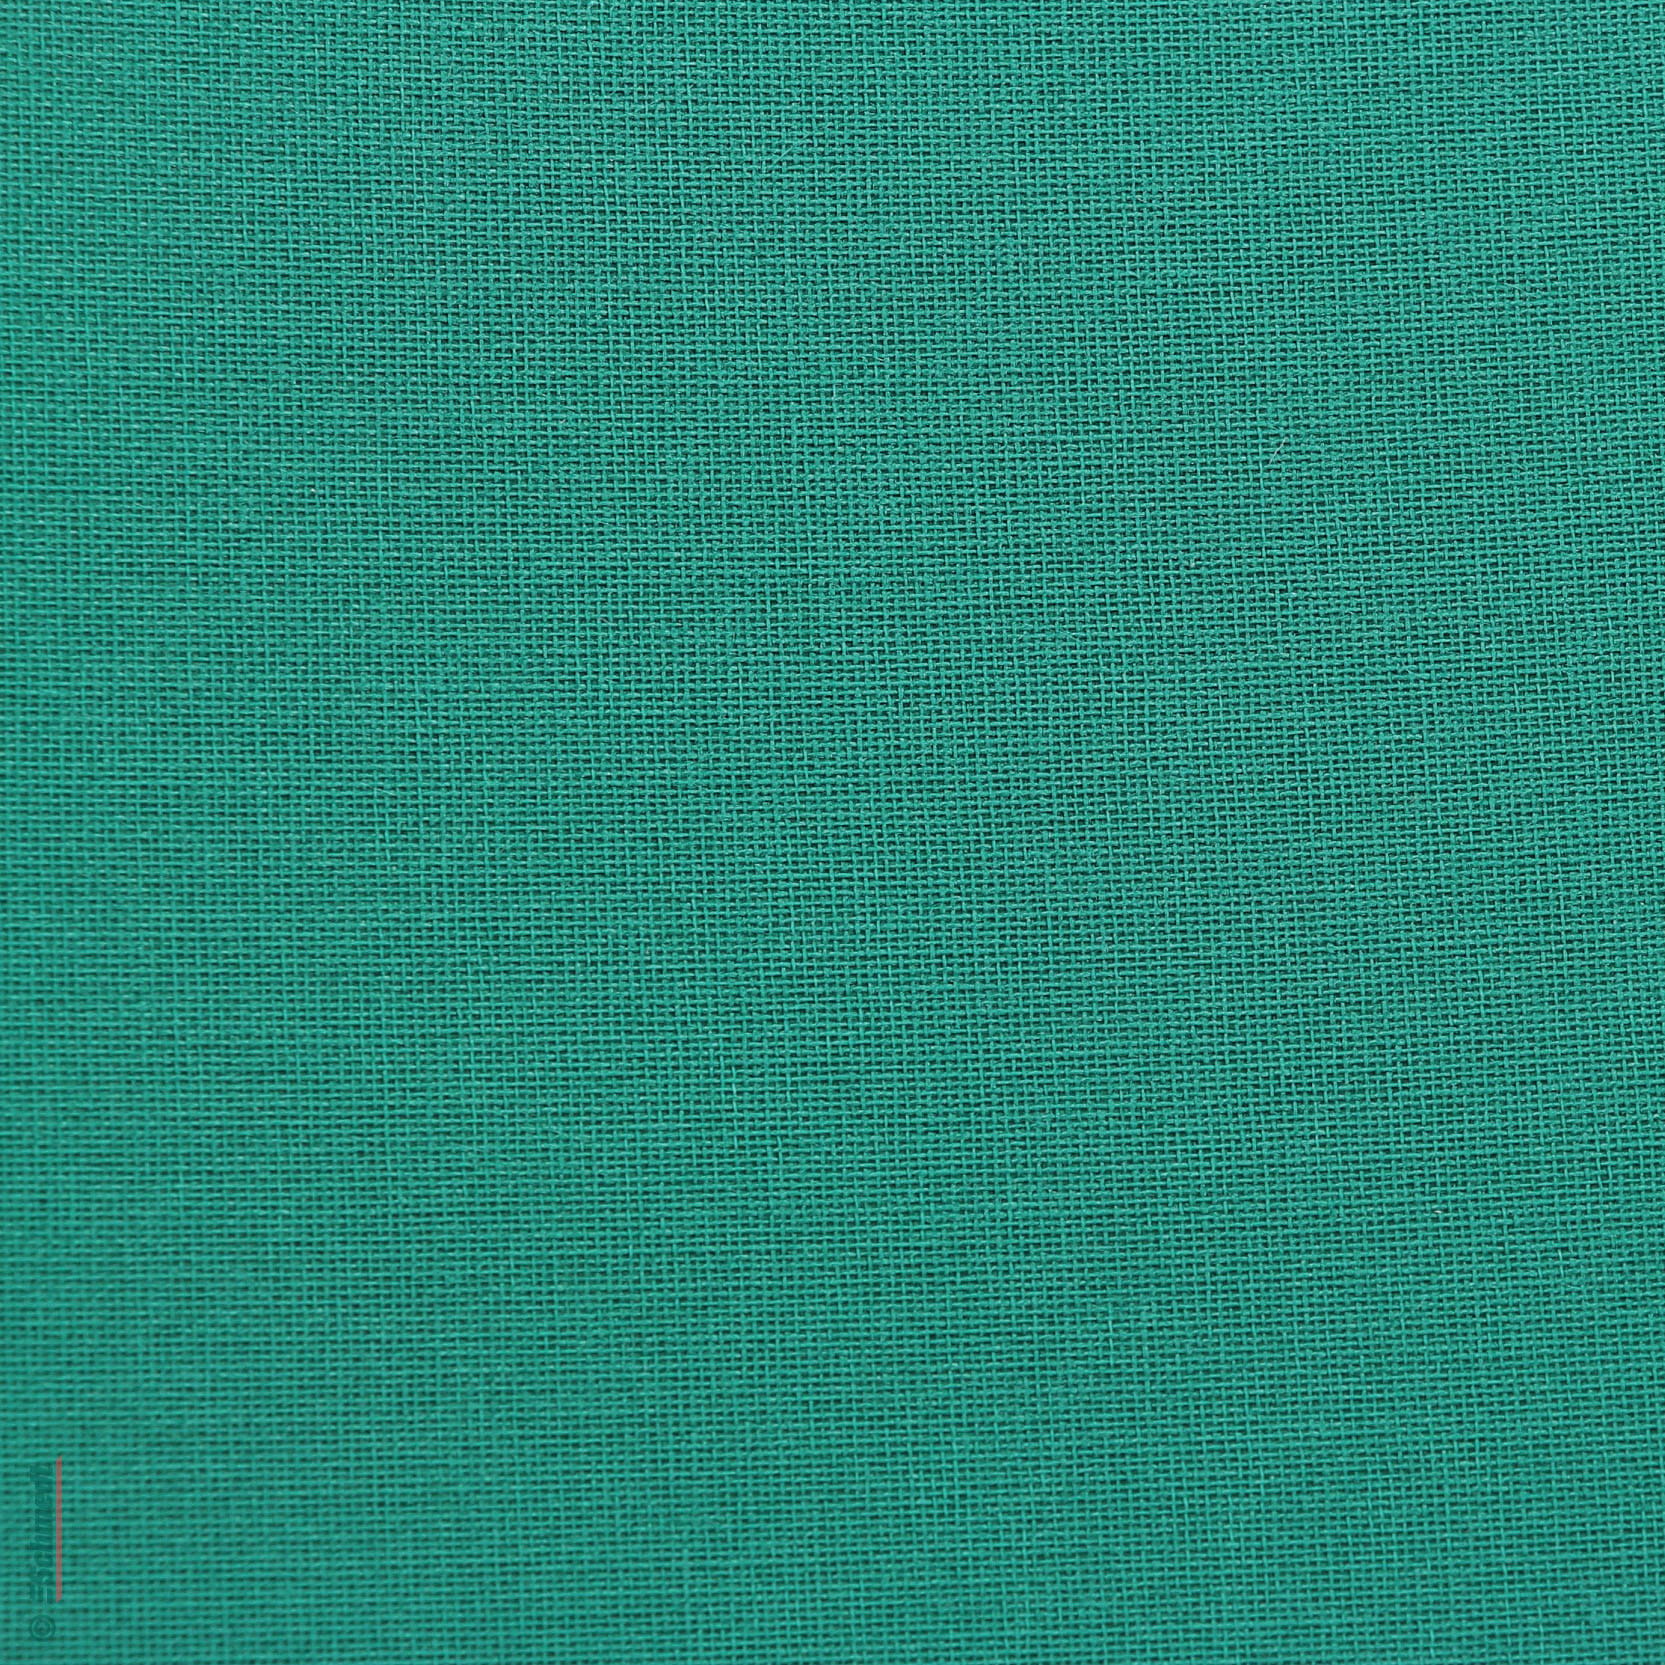 Green Color Bookbinding Cloth at best price in Mumbai by Turakhia